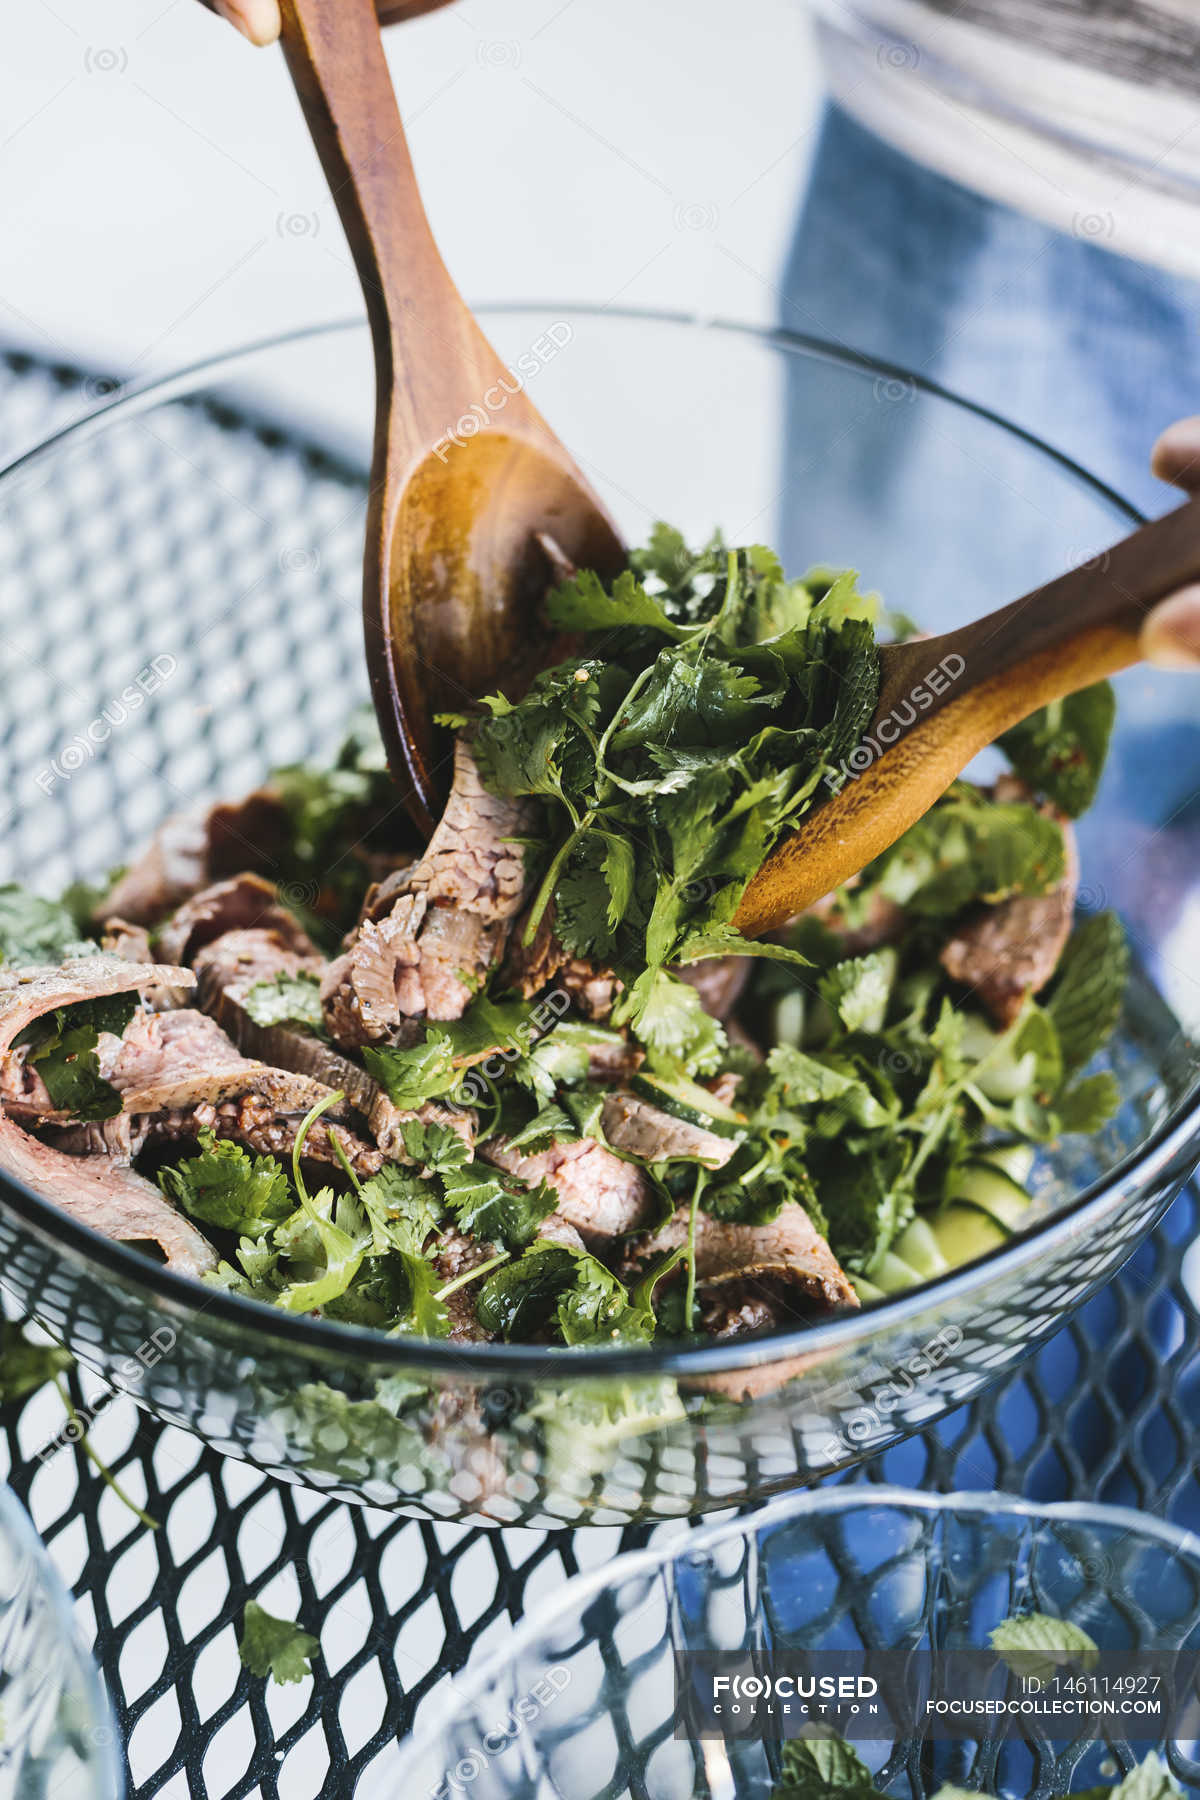 Man cooking Grilled Beef salad — Stock Photo | #146114927